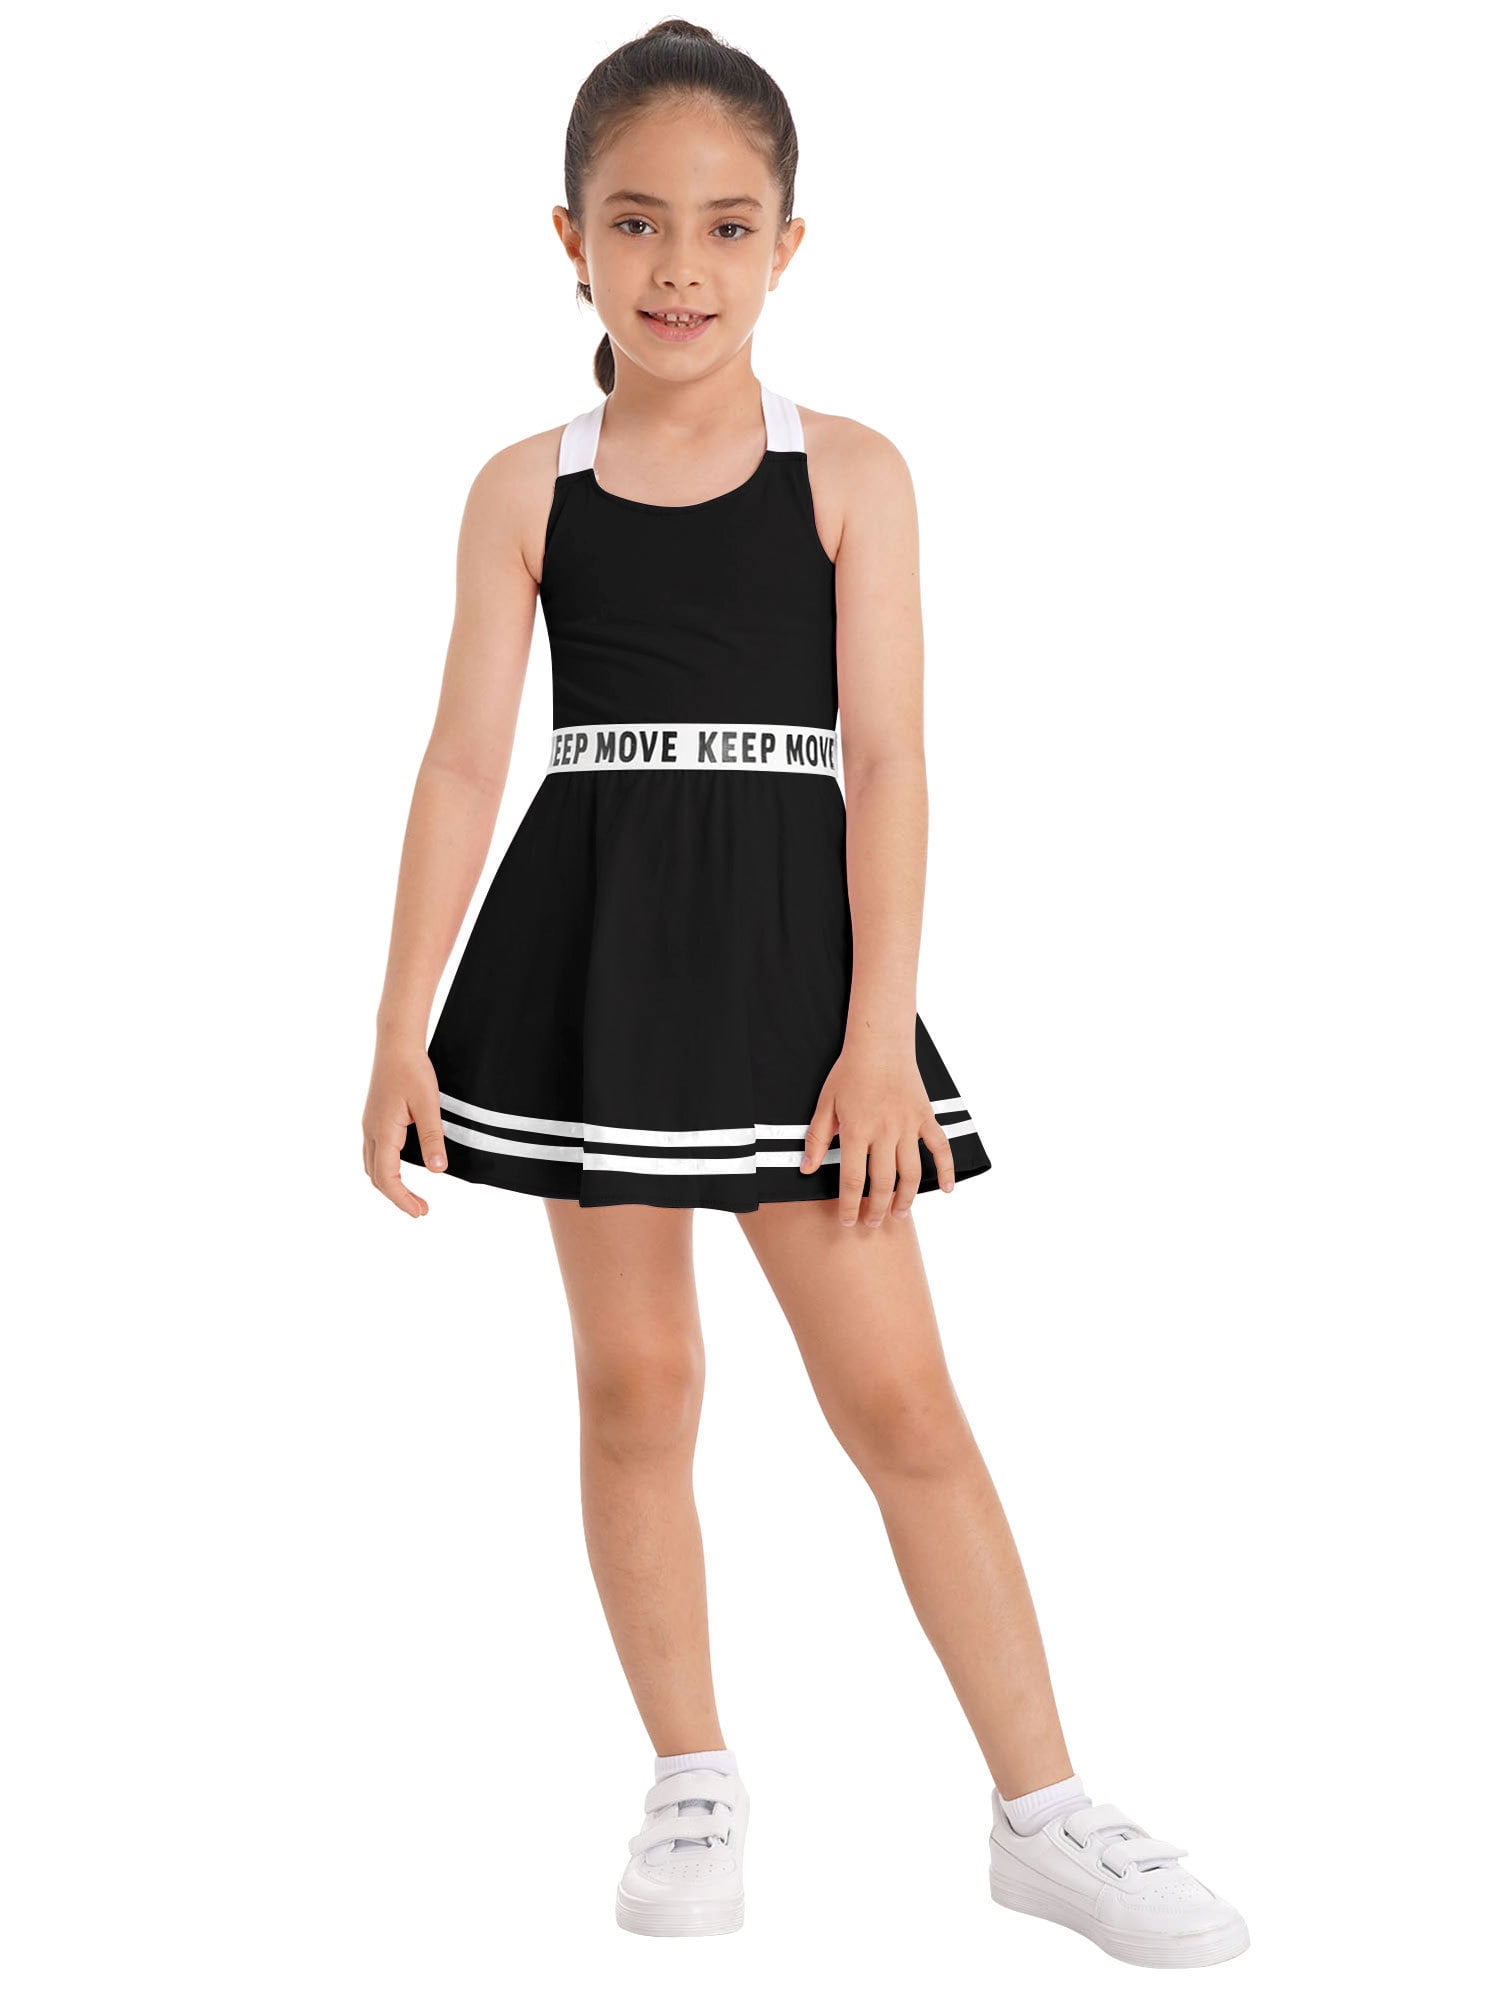 YEAHDOR Kids Girls Sports Suit Straps Cross at Rear A-Line Dress with  Shorts Set Gym Tennis Volleyball Outfit Black 12 